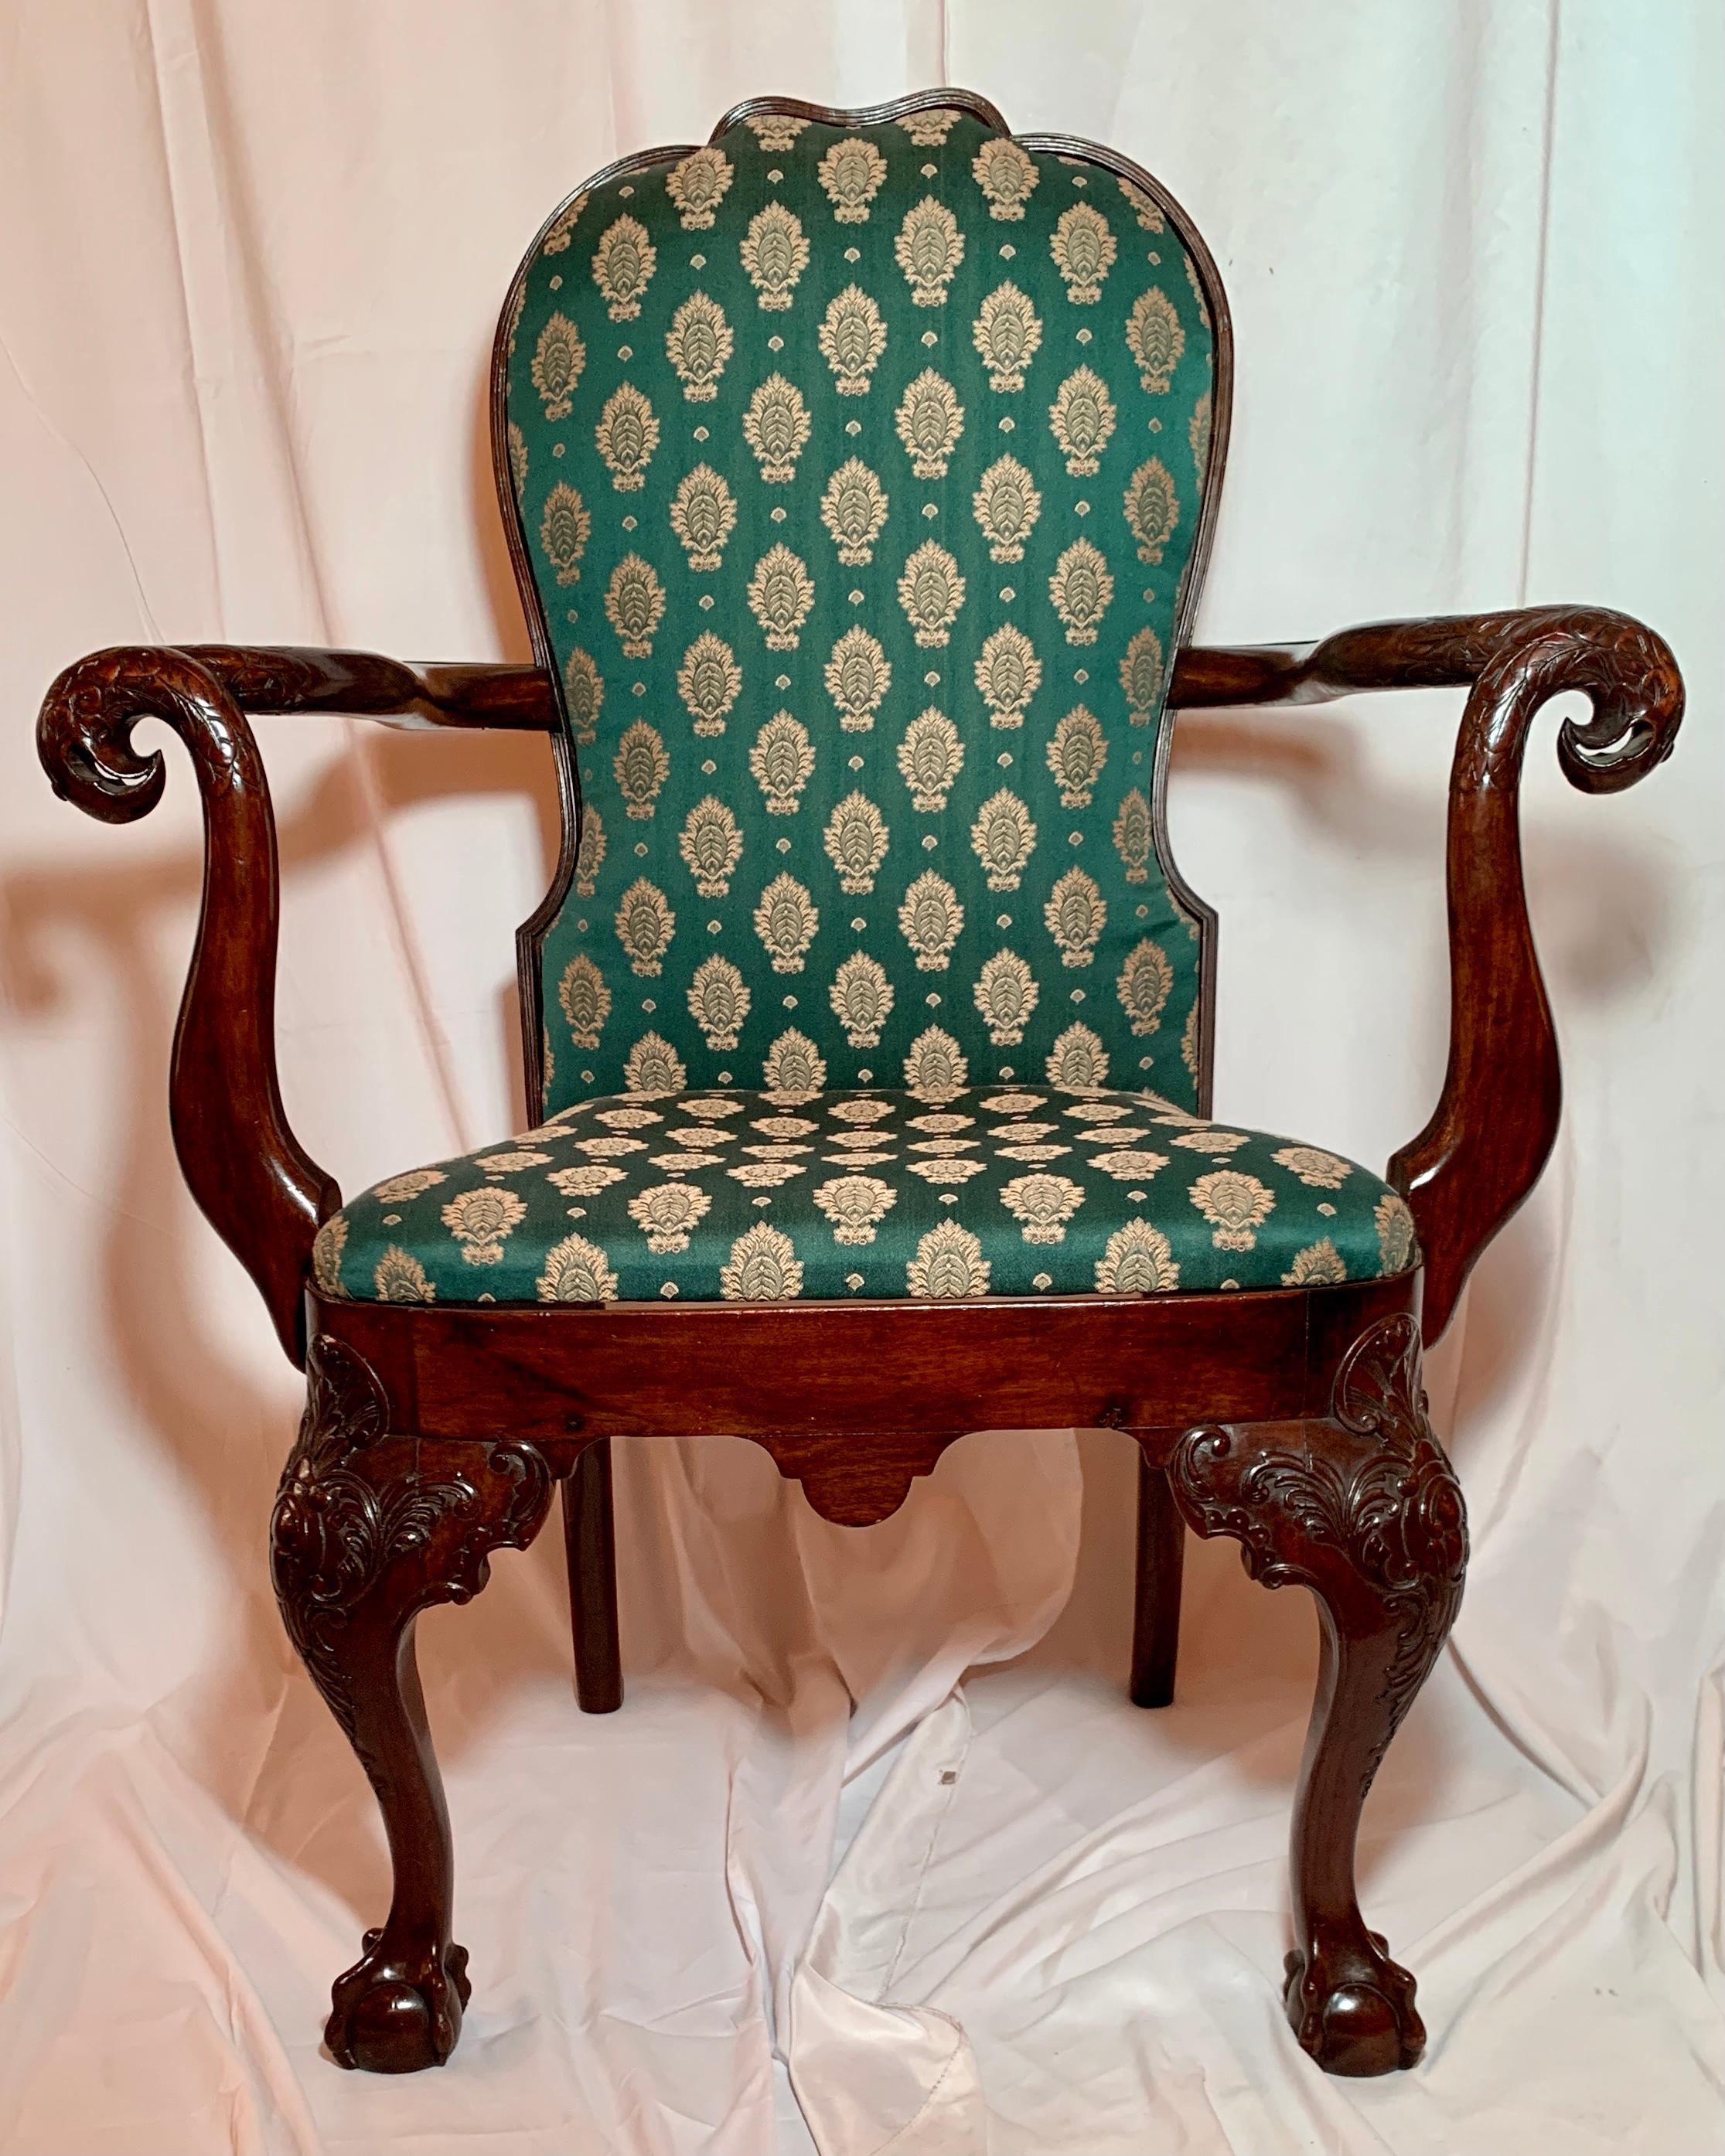 Pair antique English Mahogany arm chairs, Circa 1850-1870. Reupholstered with emerald green and gold fabric.